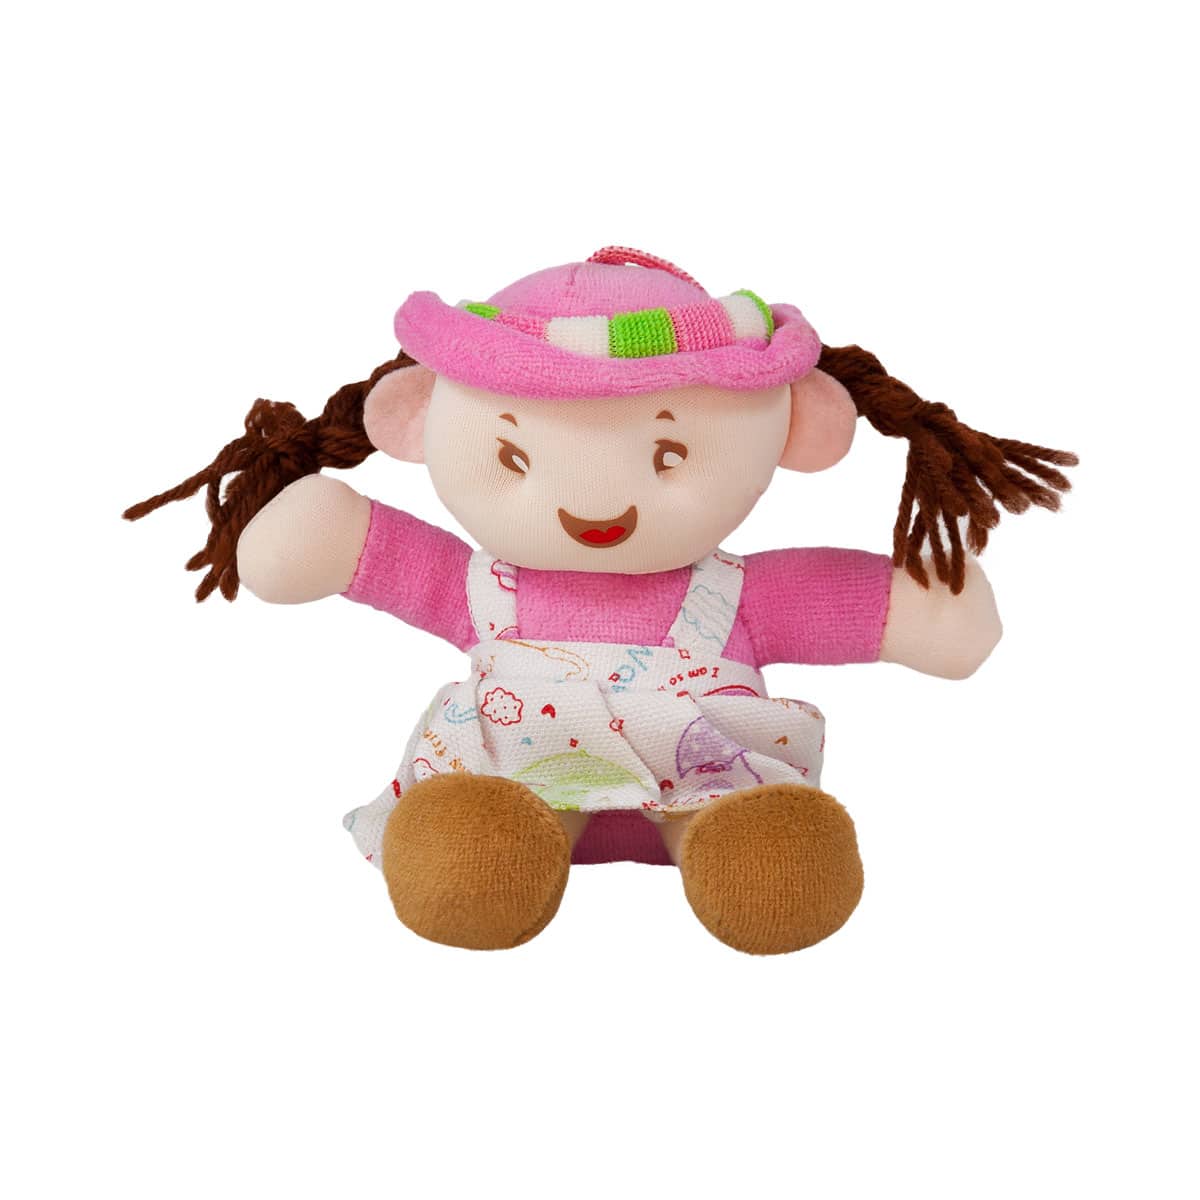 Soft doll with hat - Girl